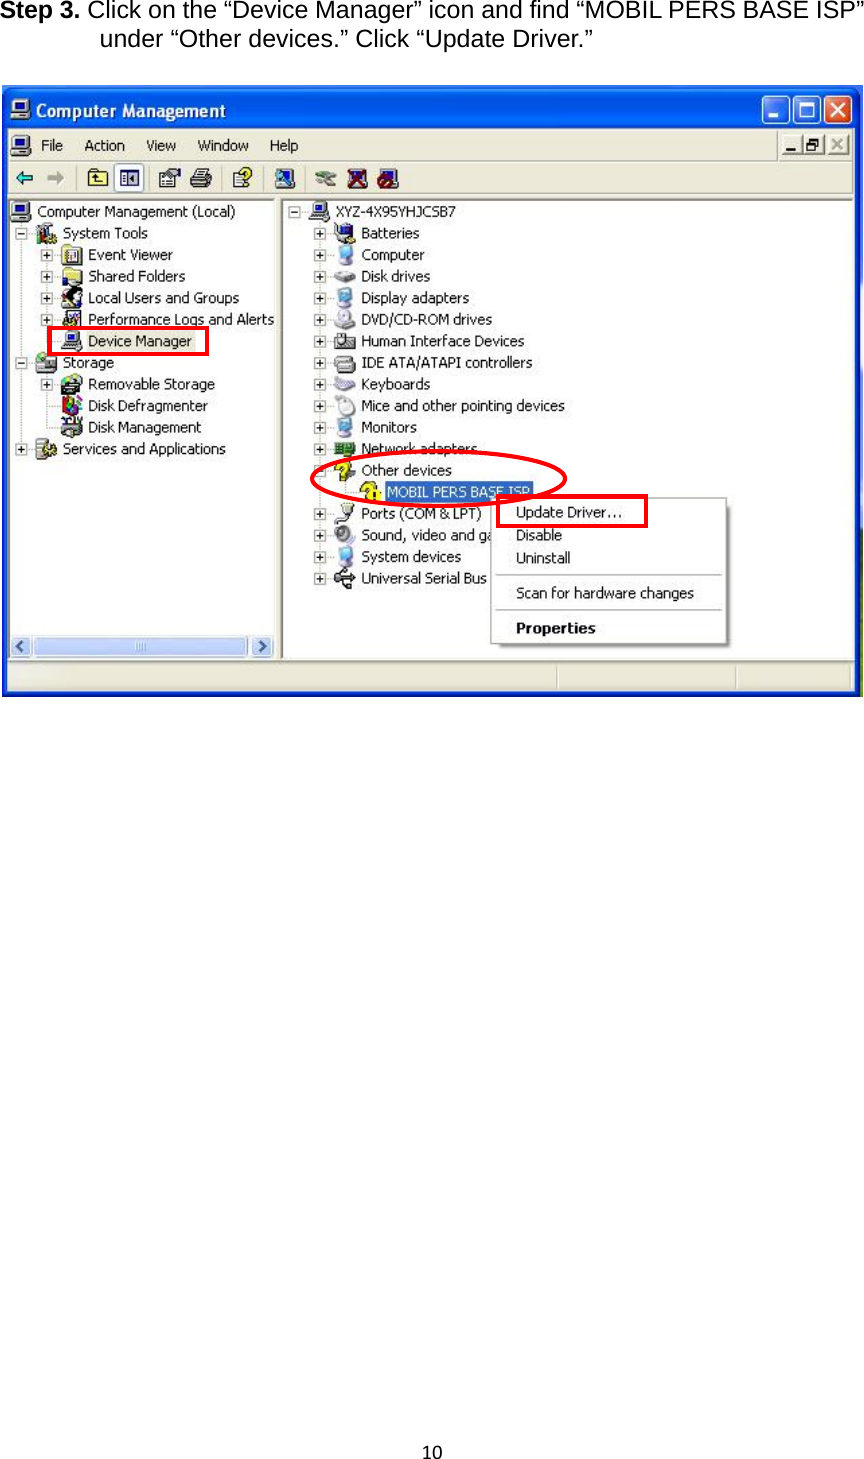 10Step 3. Click on the “Device Manager” icon and find “MOBIL PERS BASE ISP” under “Other devices.” Click “Update Driver.”                